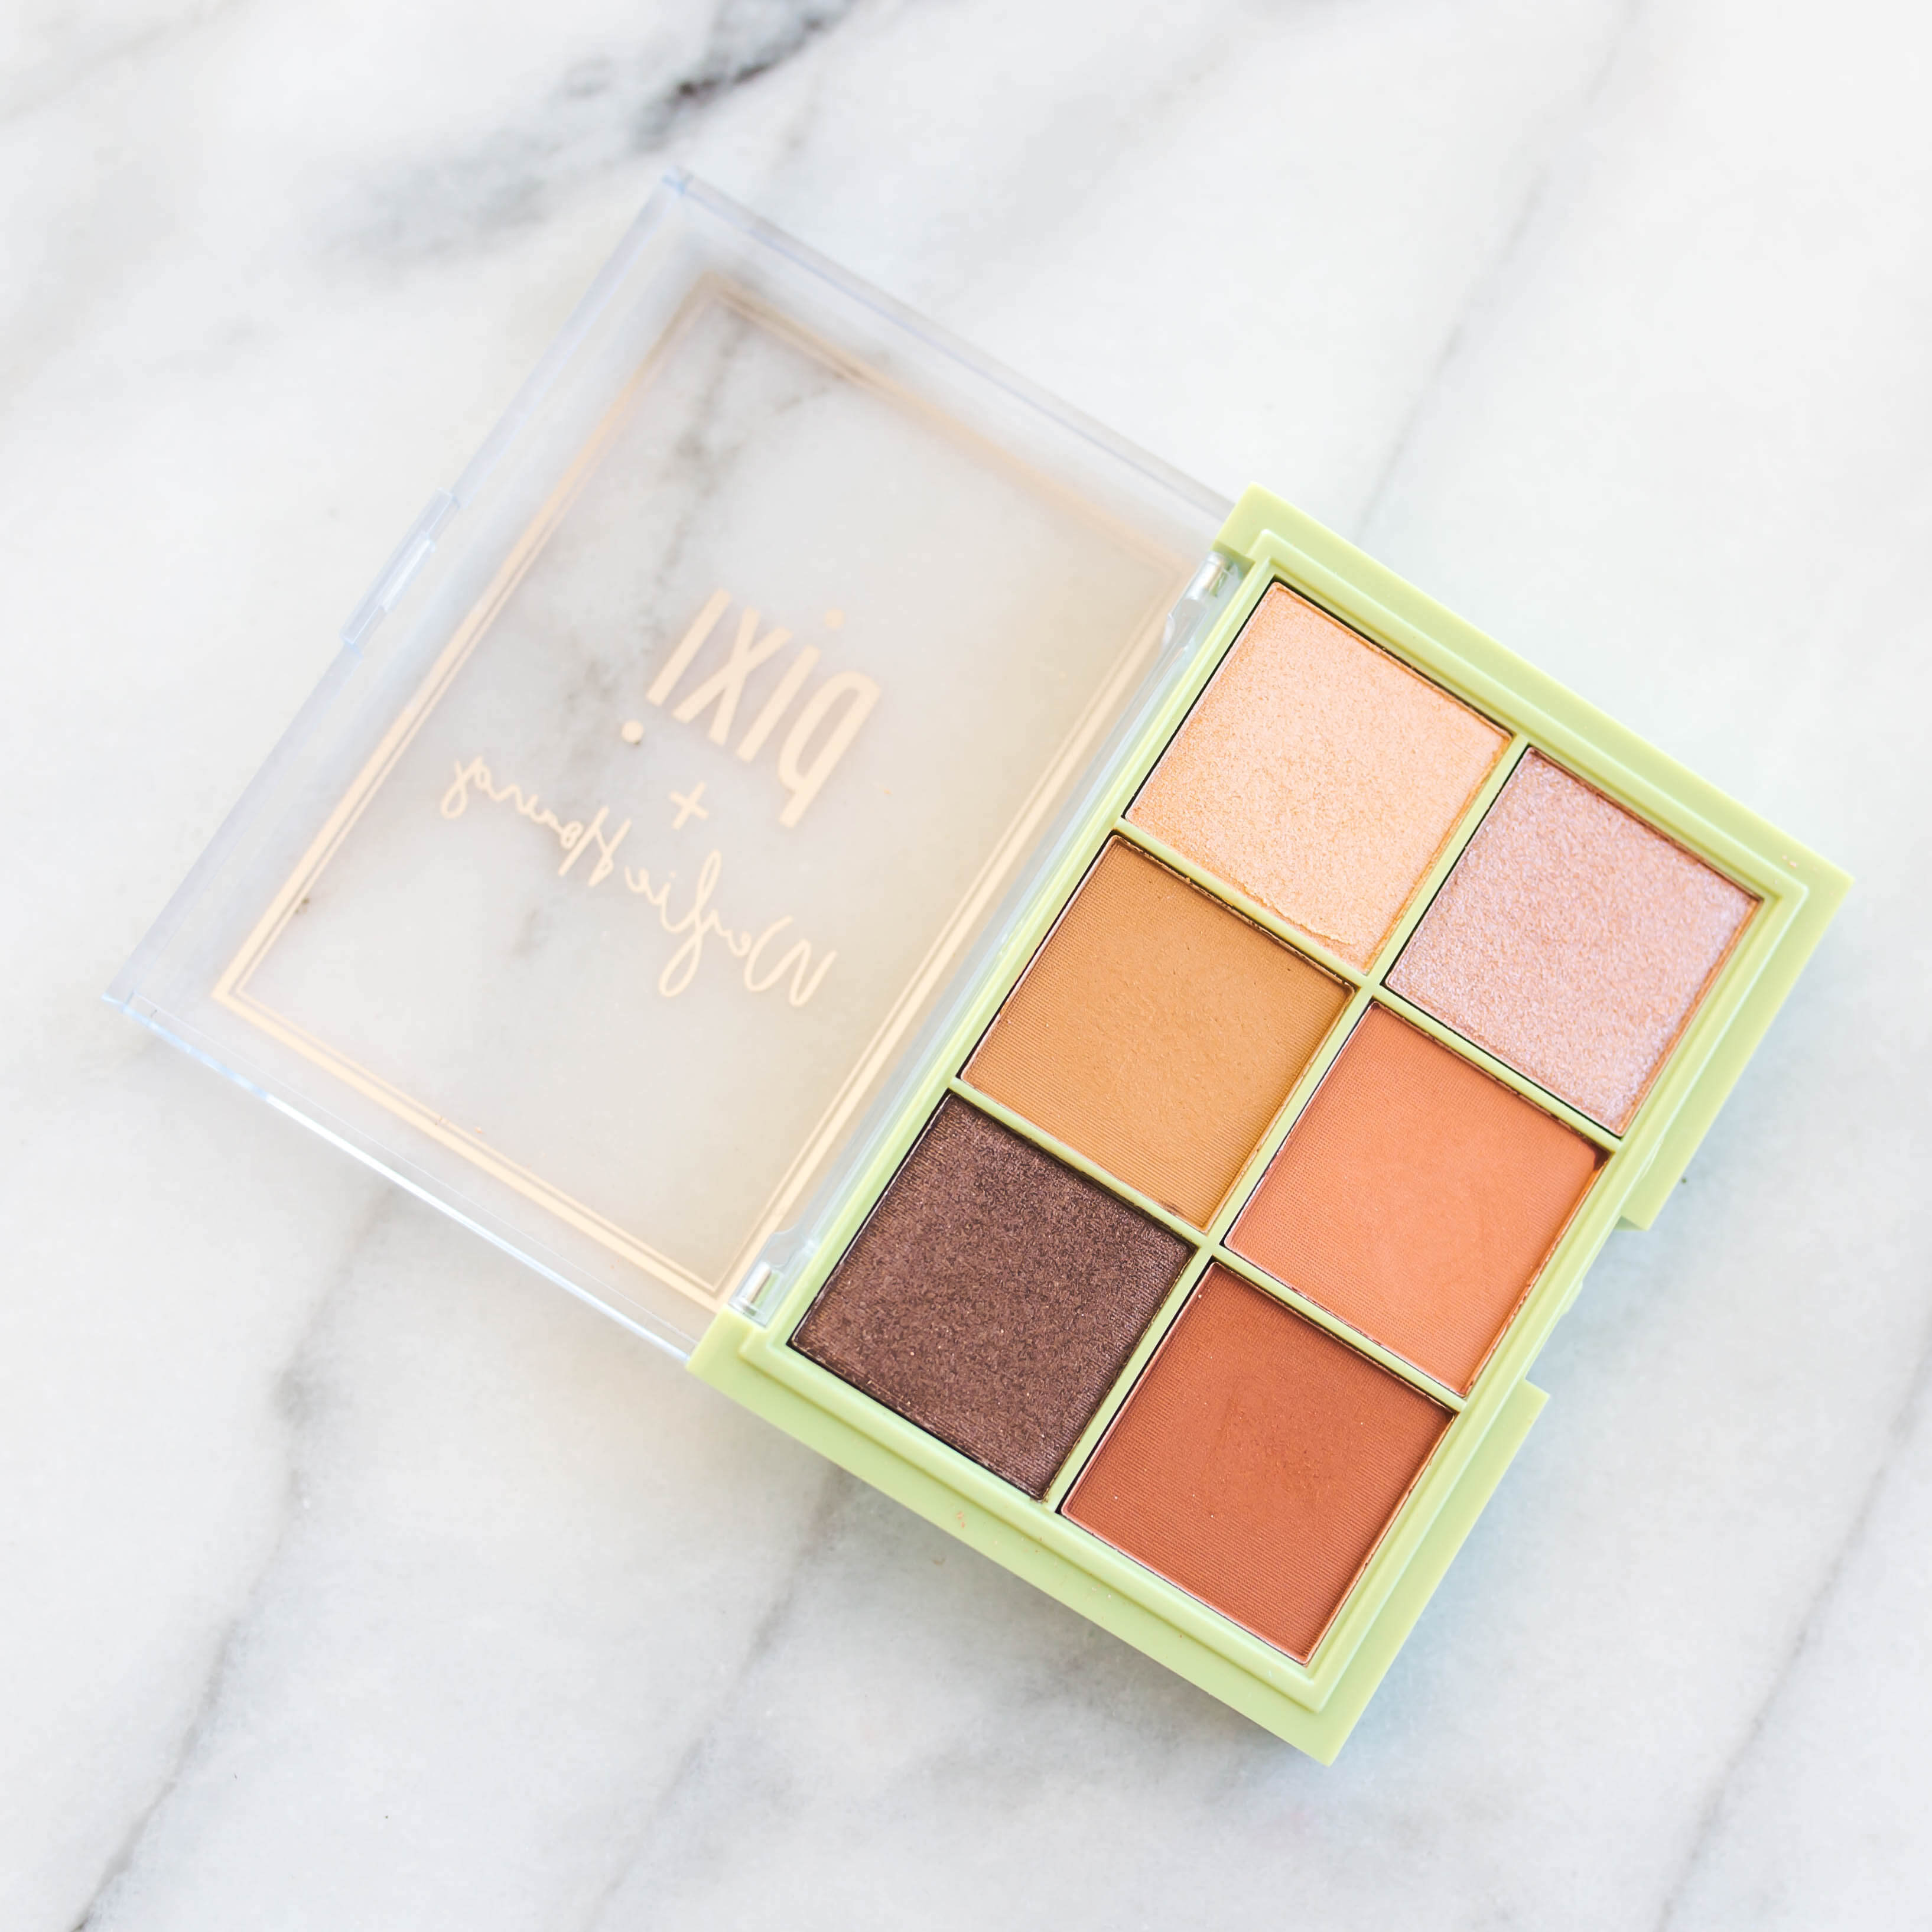 Pixi Beauty Let's Talk Eyeshadow Palette Review + Swatches | Twinspiration